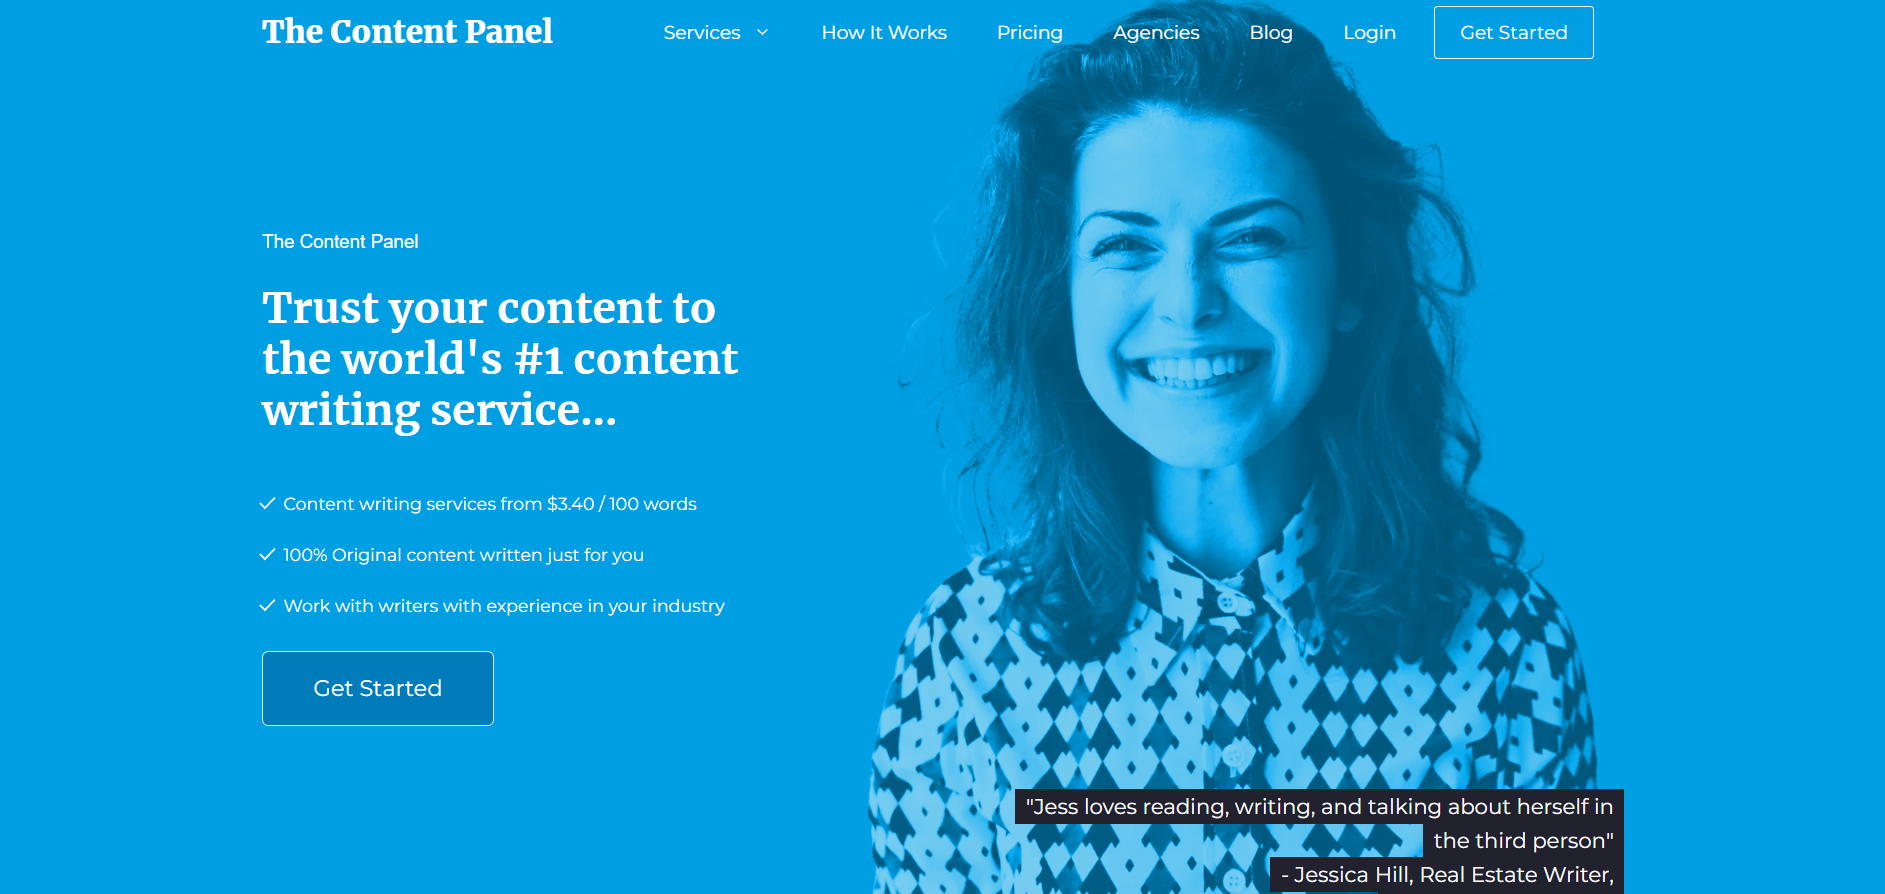 The Content Panel homepage screenshot